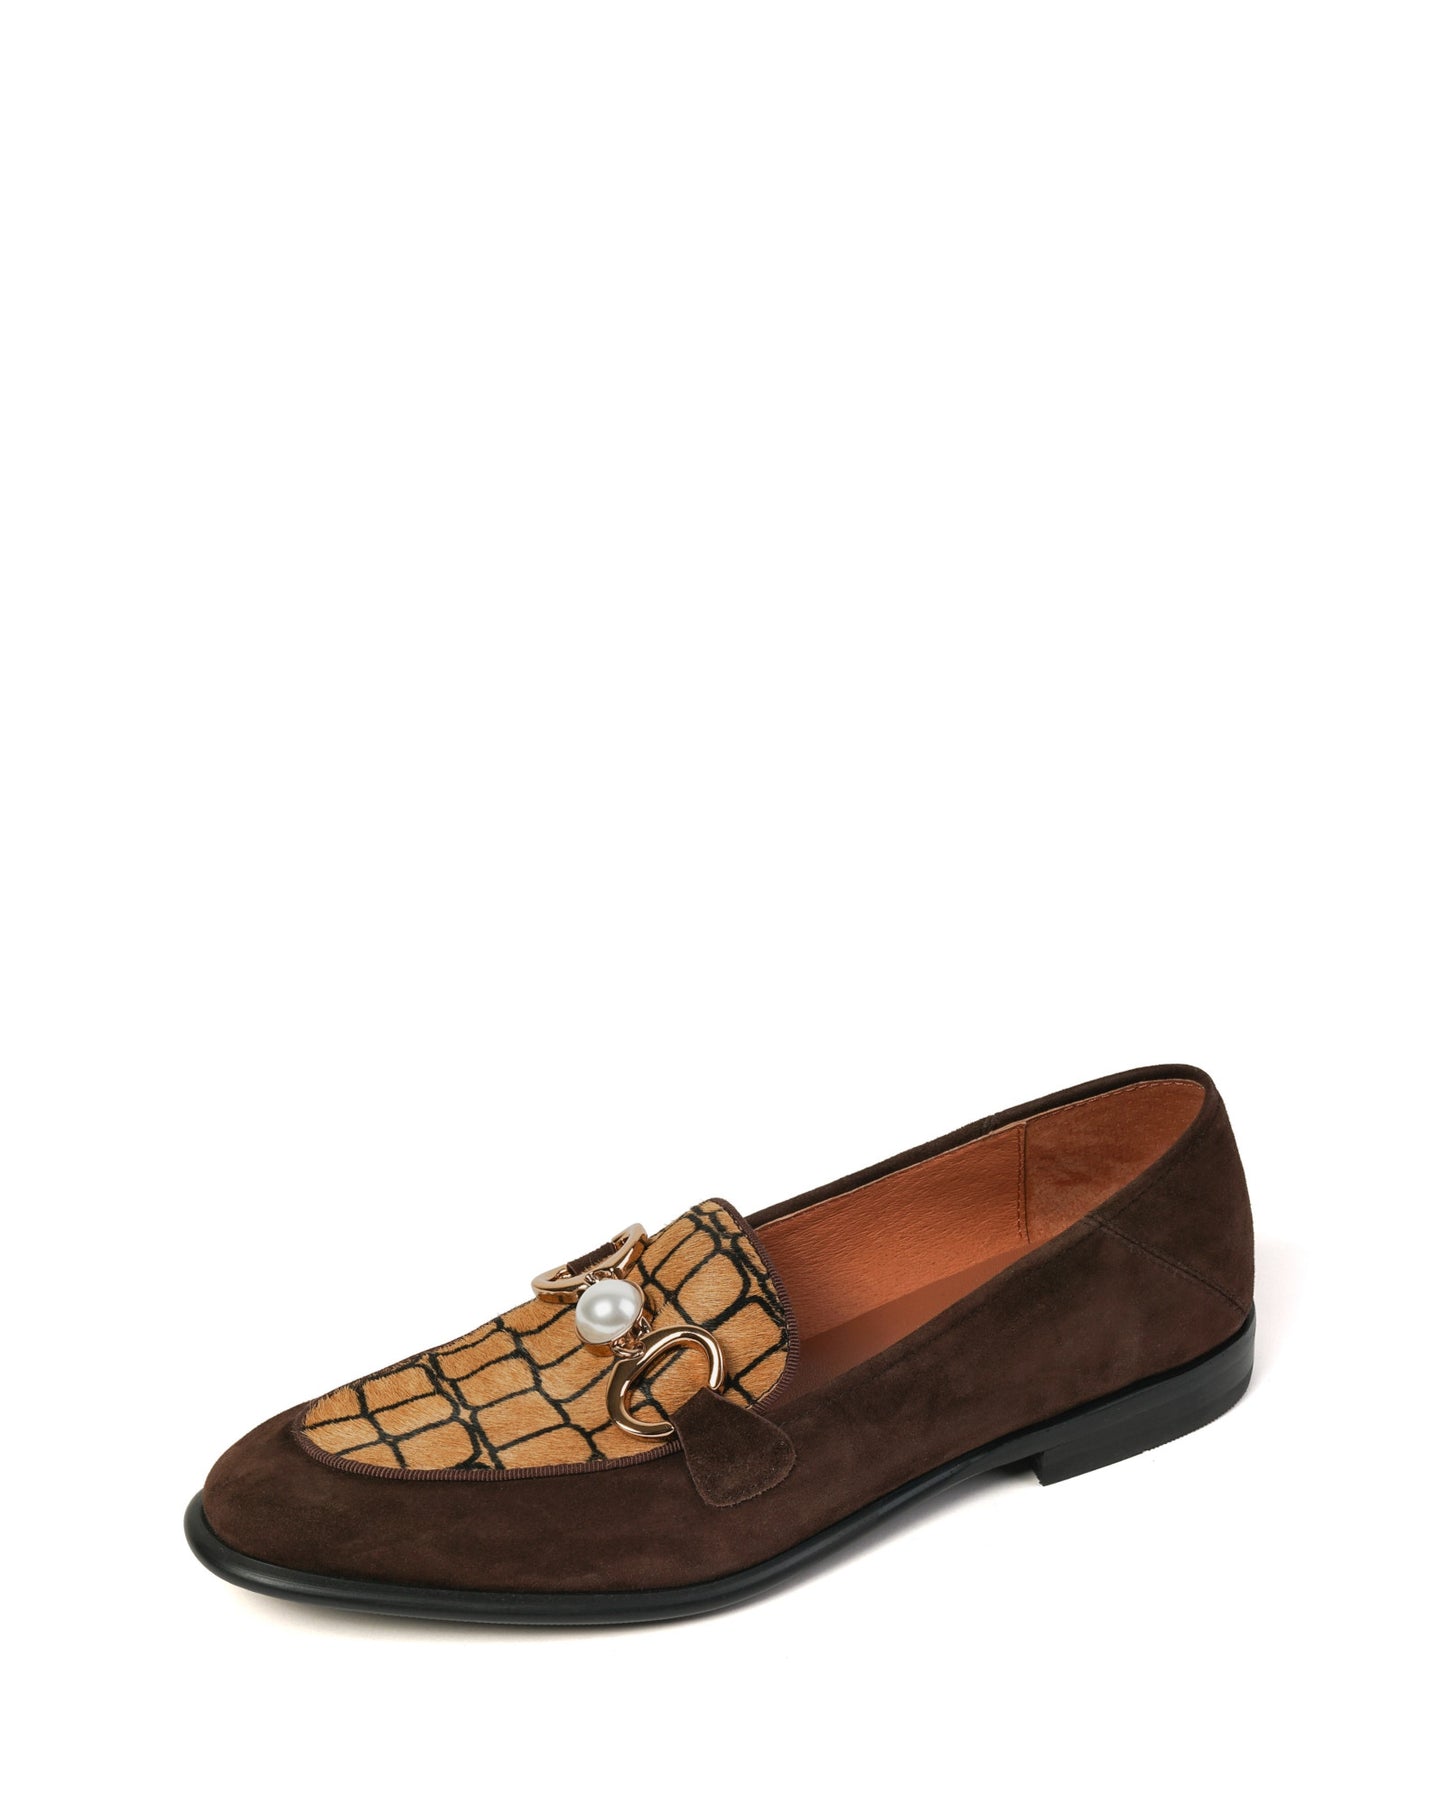 228-calf-hair-loafers-brown